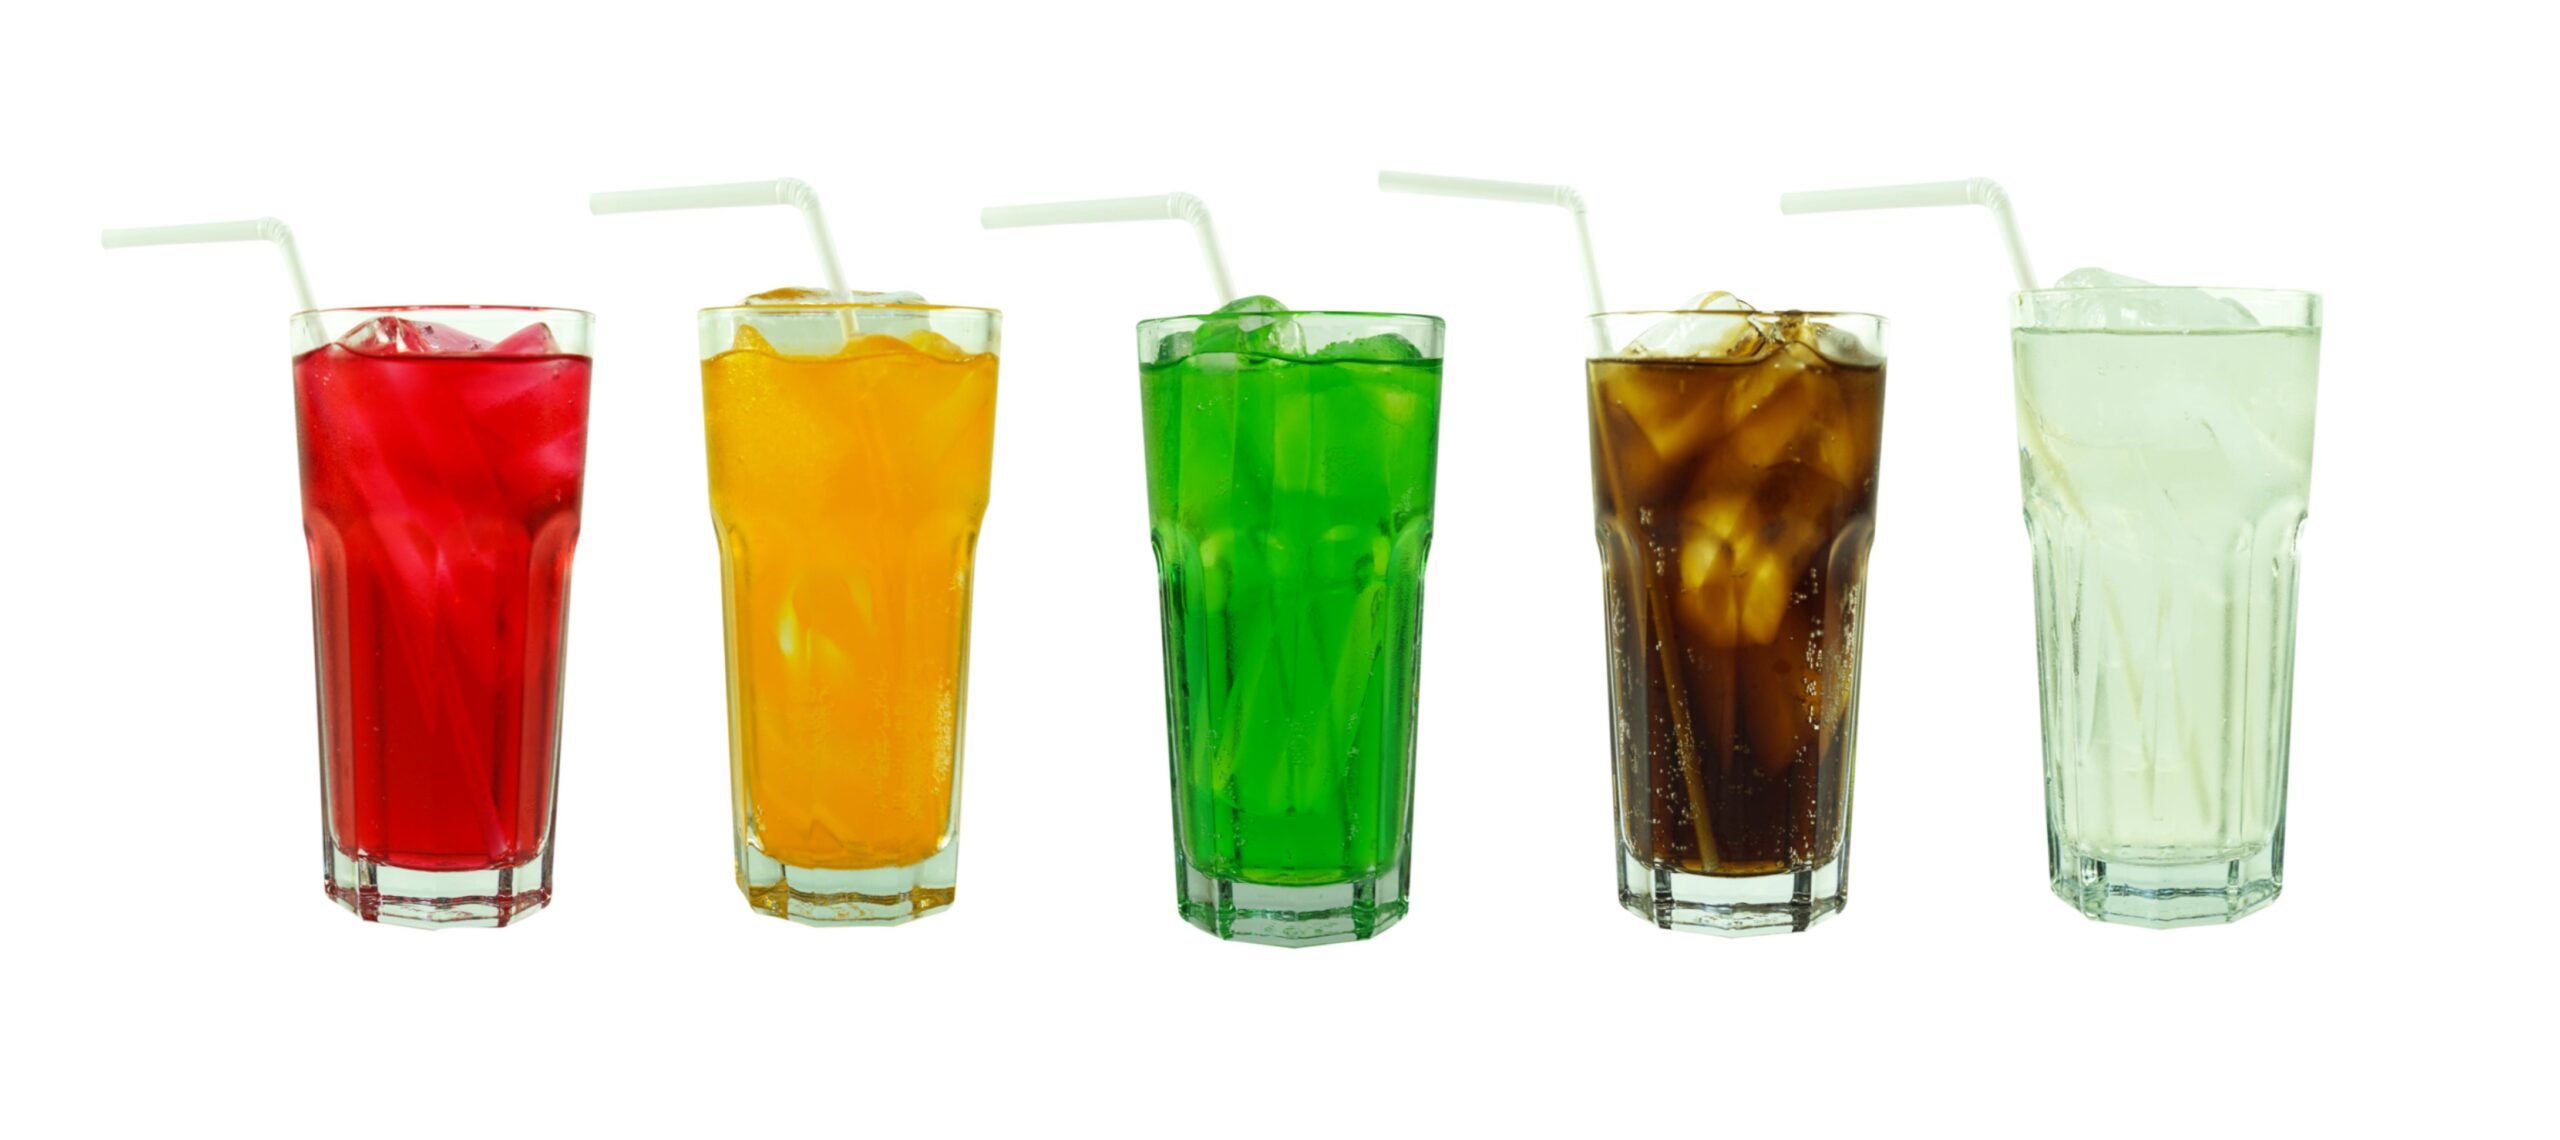 Sugary Drink Consumption May Be Linked To Increased Risk Of Cancer